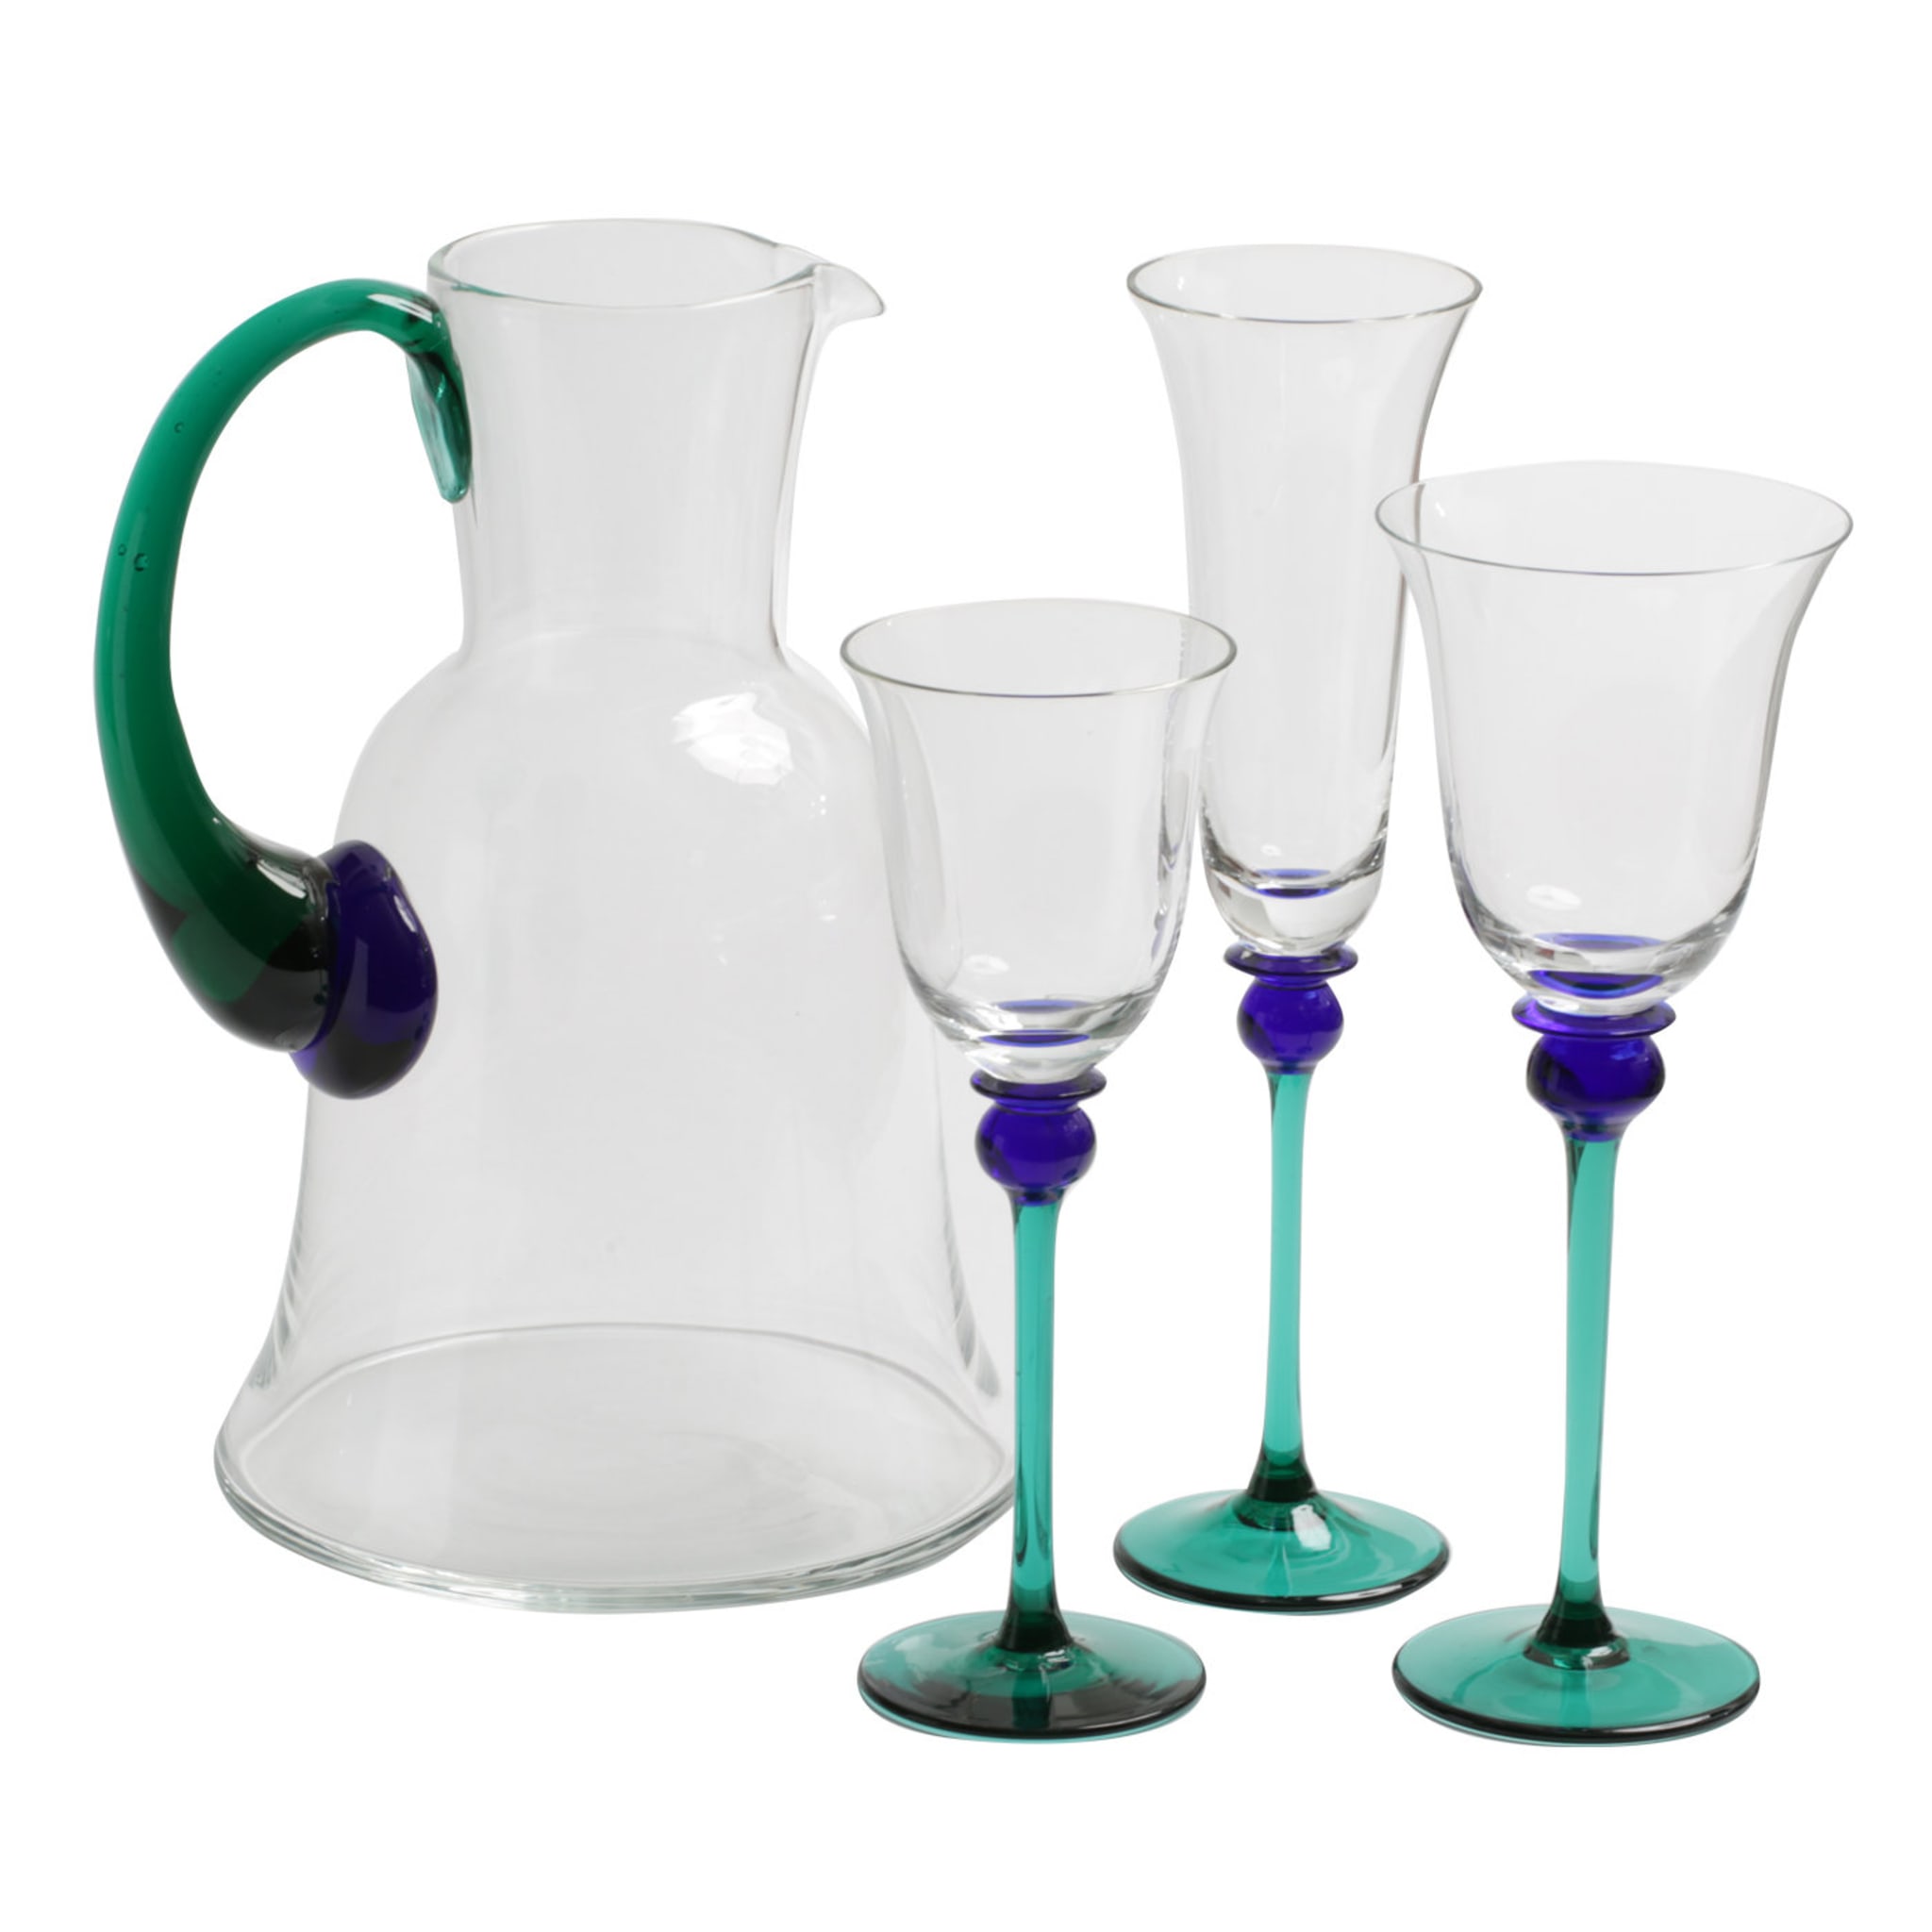 Mazzorbo Set of 3 Glasses for Six and Pitcher - Main view